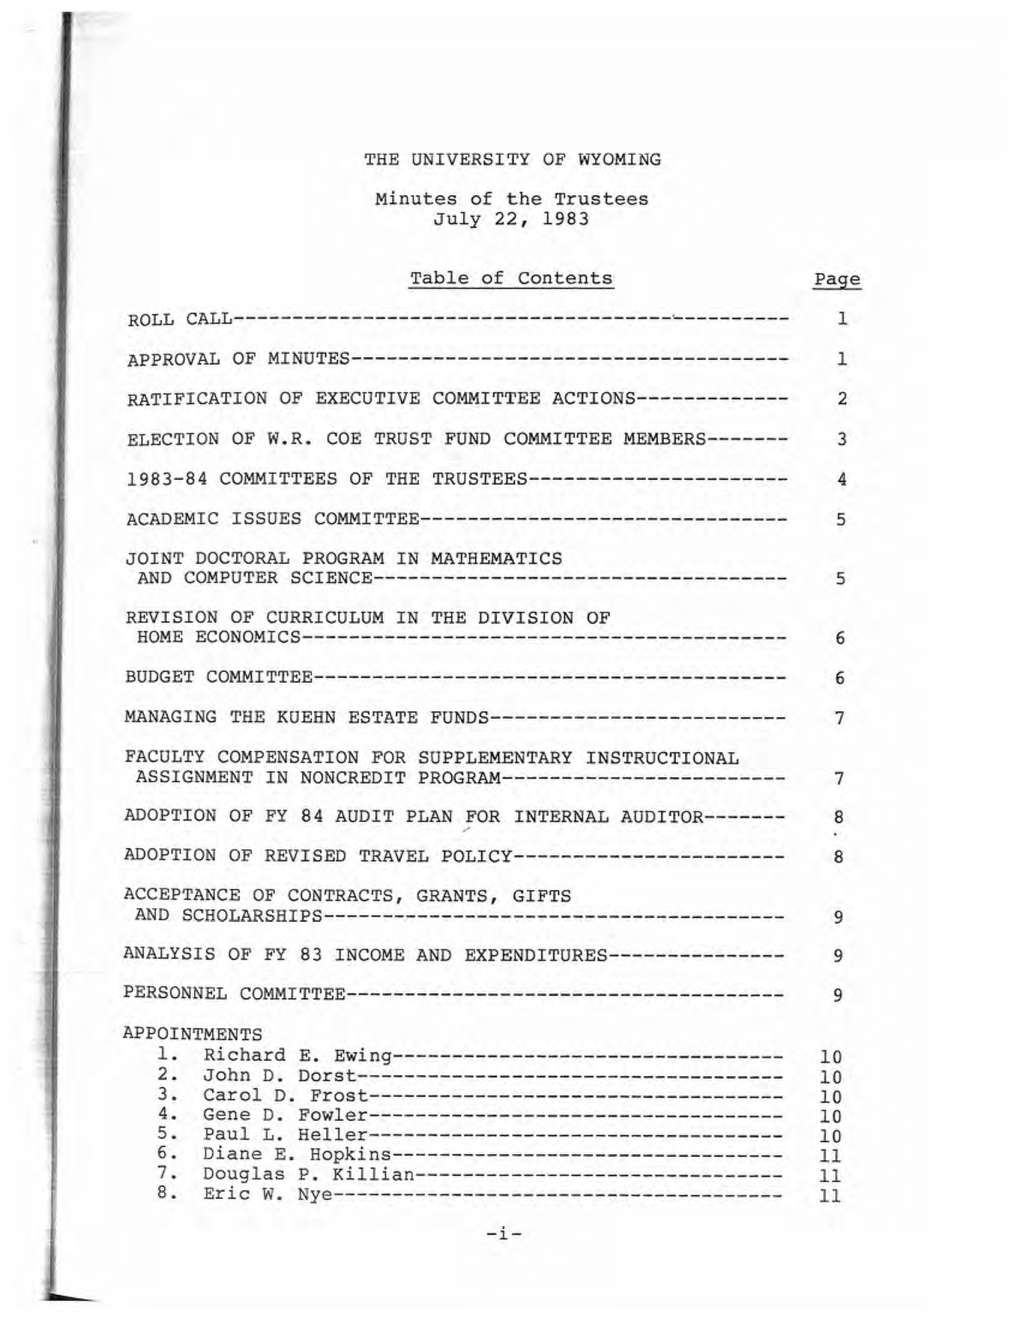 Minutes of the Trustees July 22, 1983